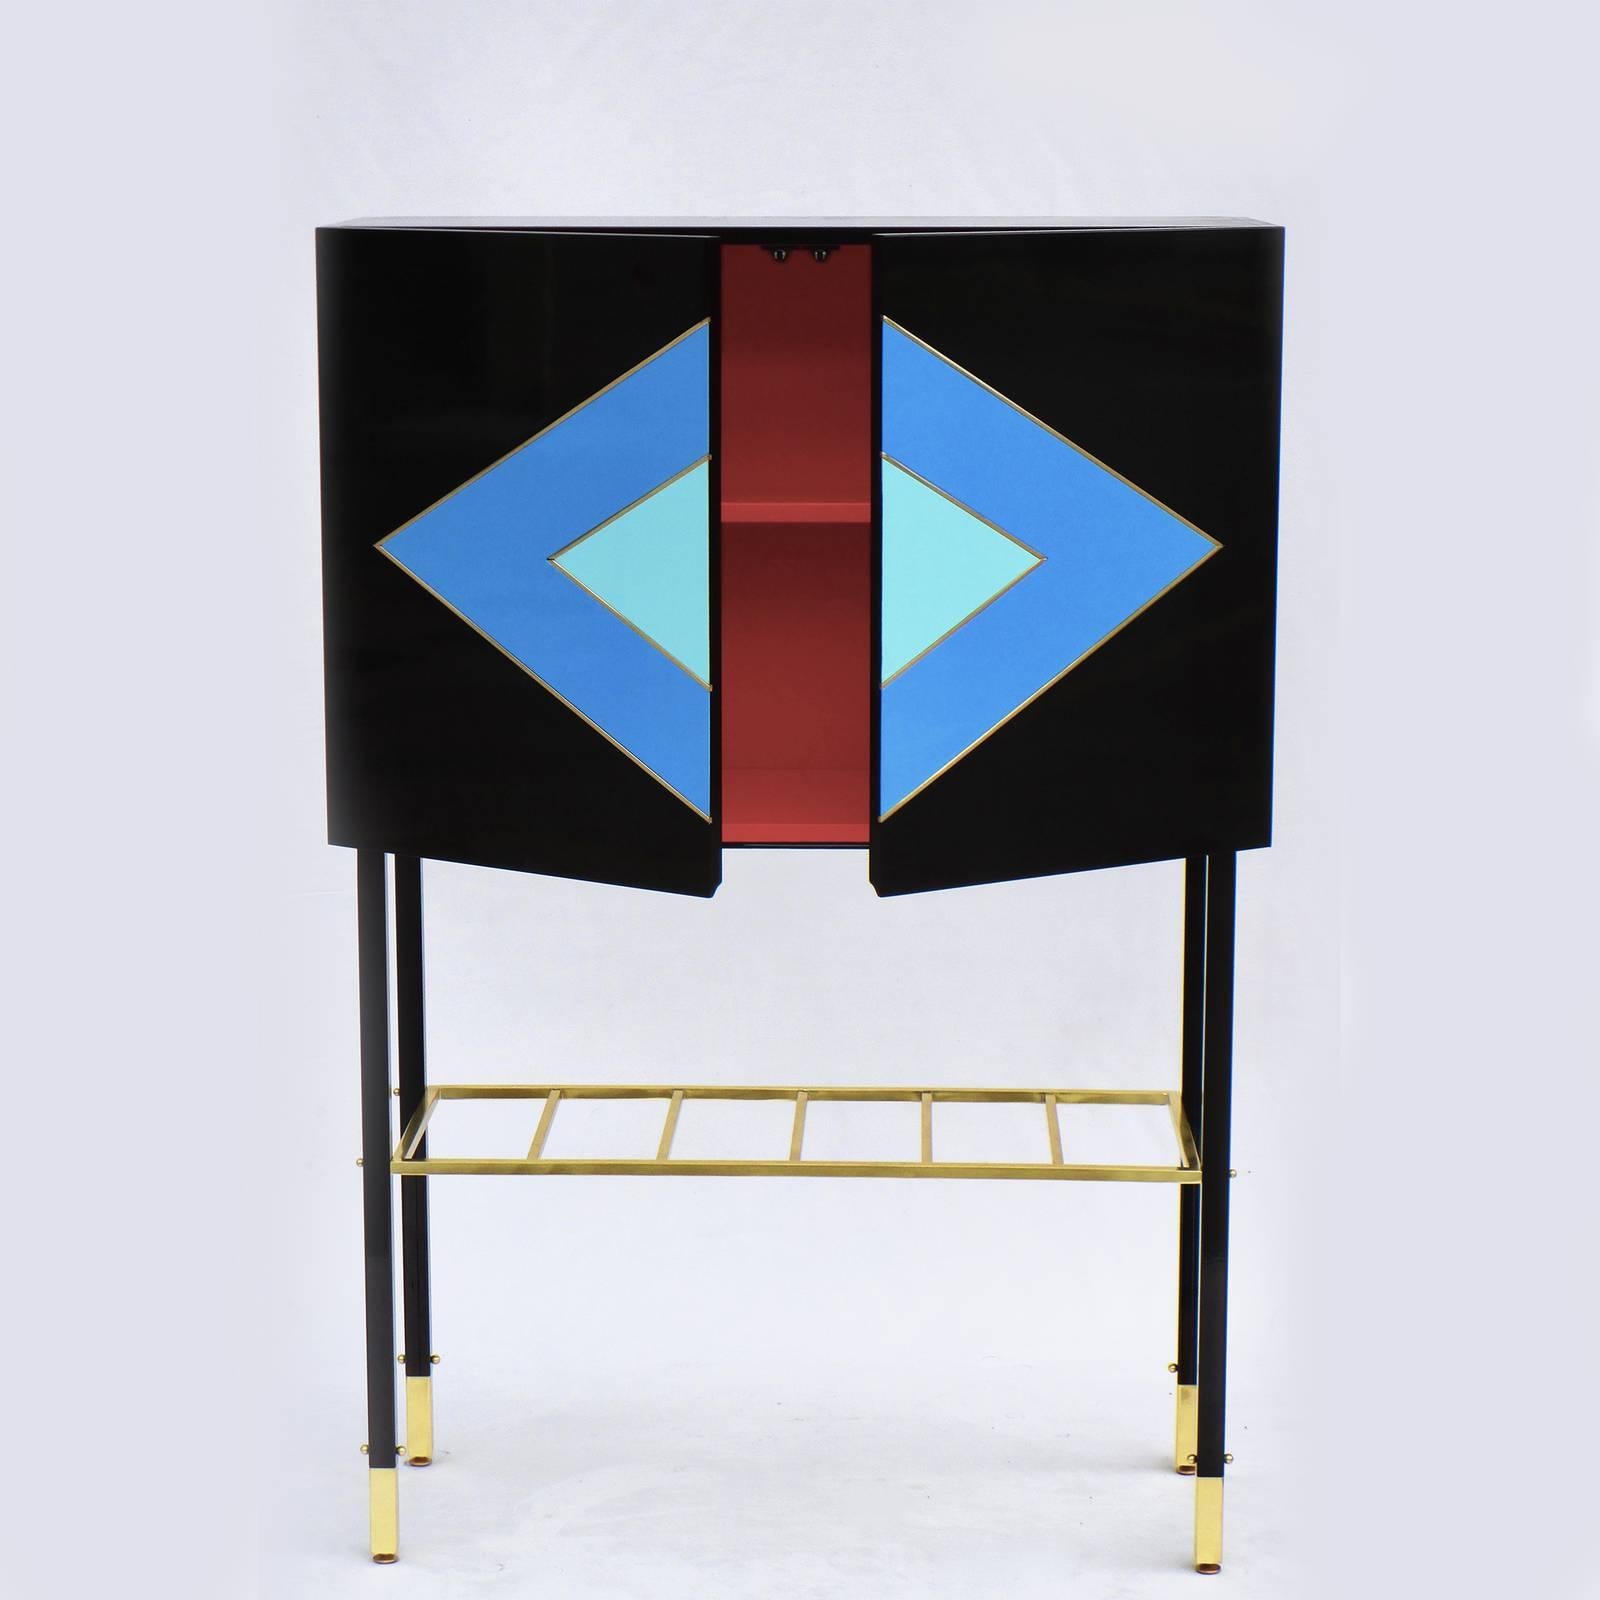 With its striking aesthetic, bold colors and geometric shapes, this modern cabinet blends originality with style in a design that effortlessly matches any decor. Featuring lacquer-finished cerulean and aqua diamond-shape inlays with brass outlines